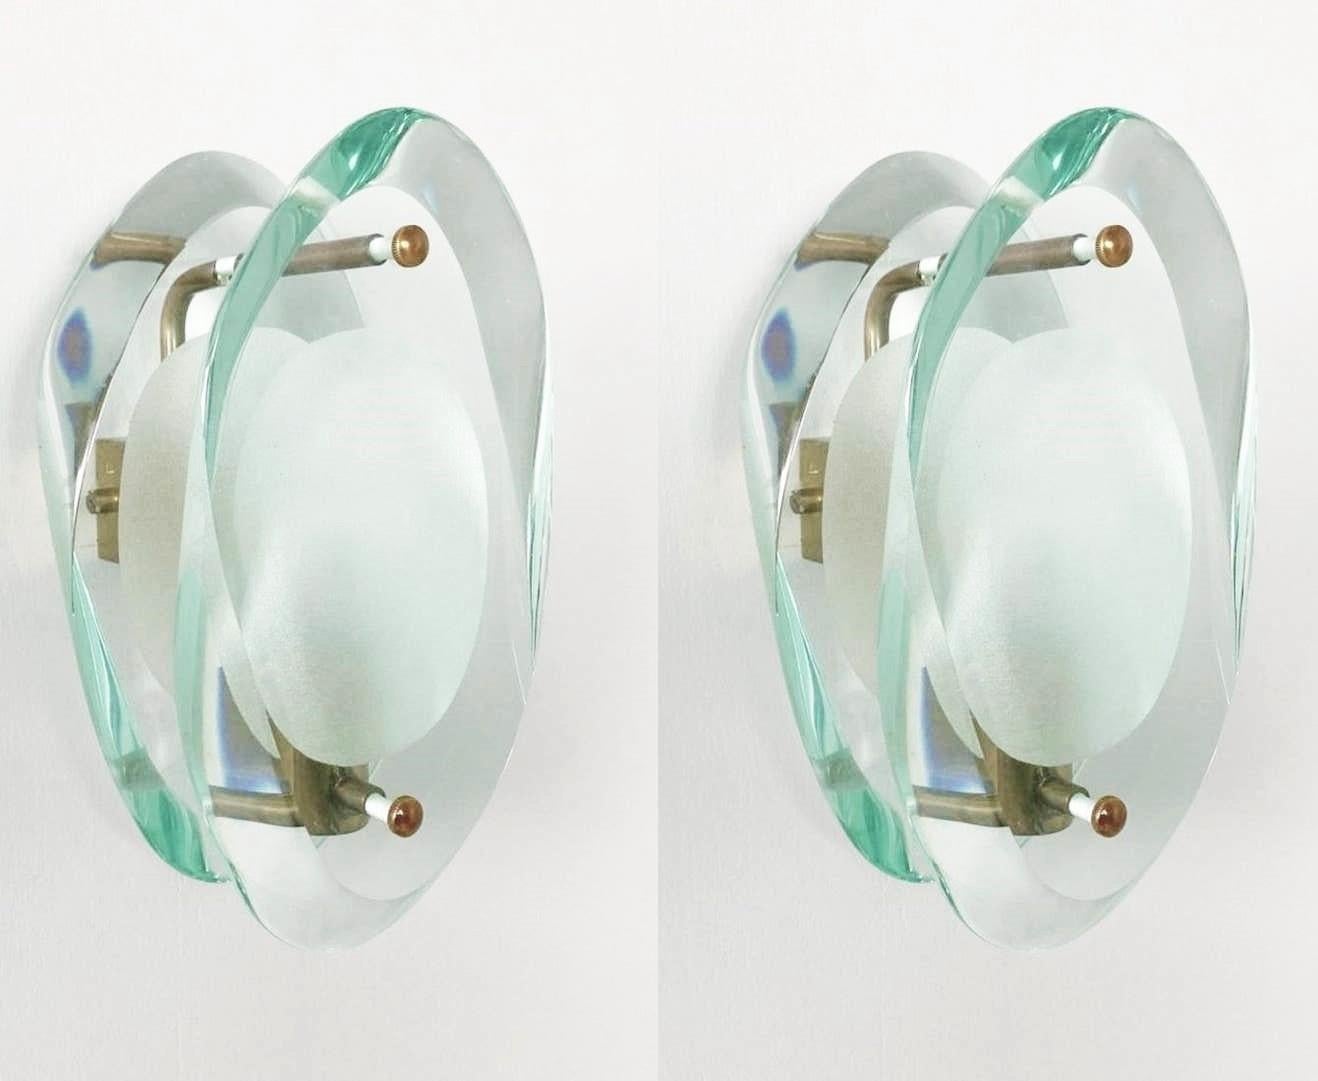 Pair of light sconces by Max Ingrand for Fontana Arte, Model 2093, Italy, 1960-1961. Organically shaped double lens cut panels of thick profiled polished Murano glass with sandblasted centers, brass mounted. The Model 2093 is one of the iconic